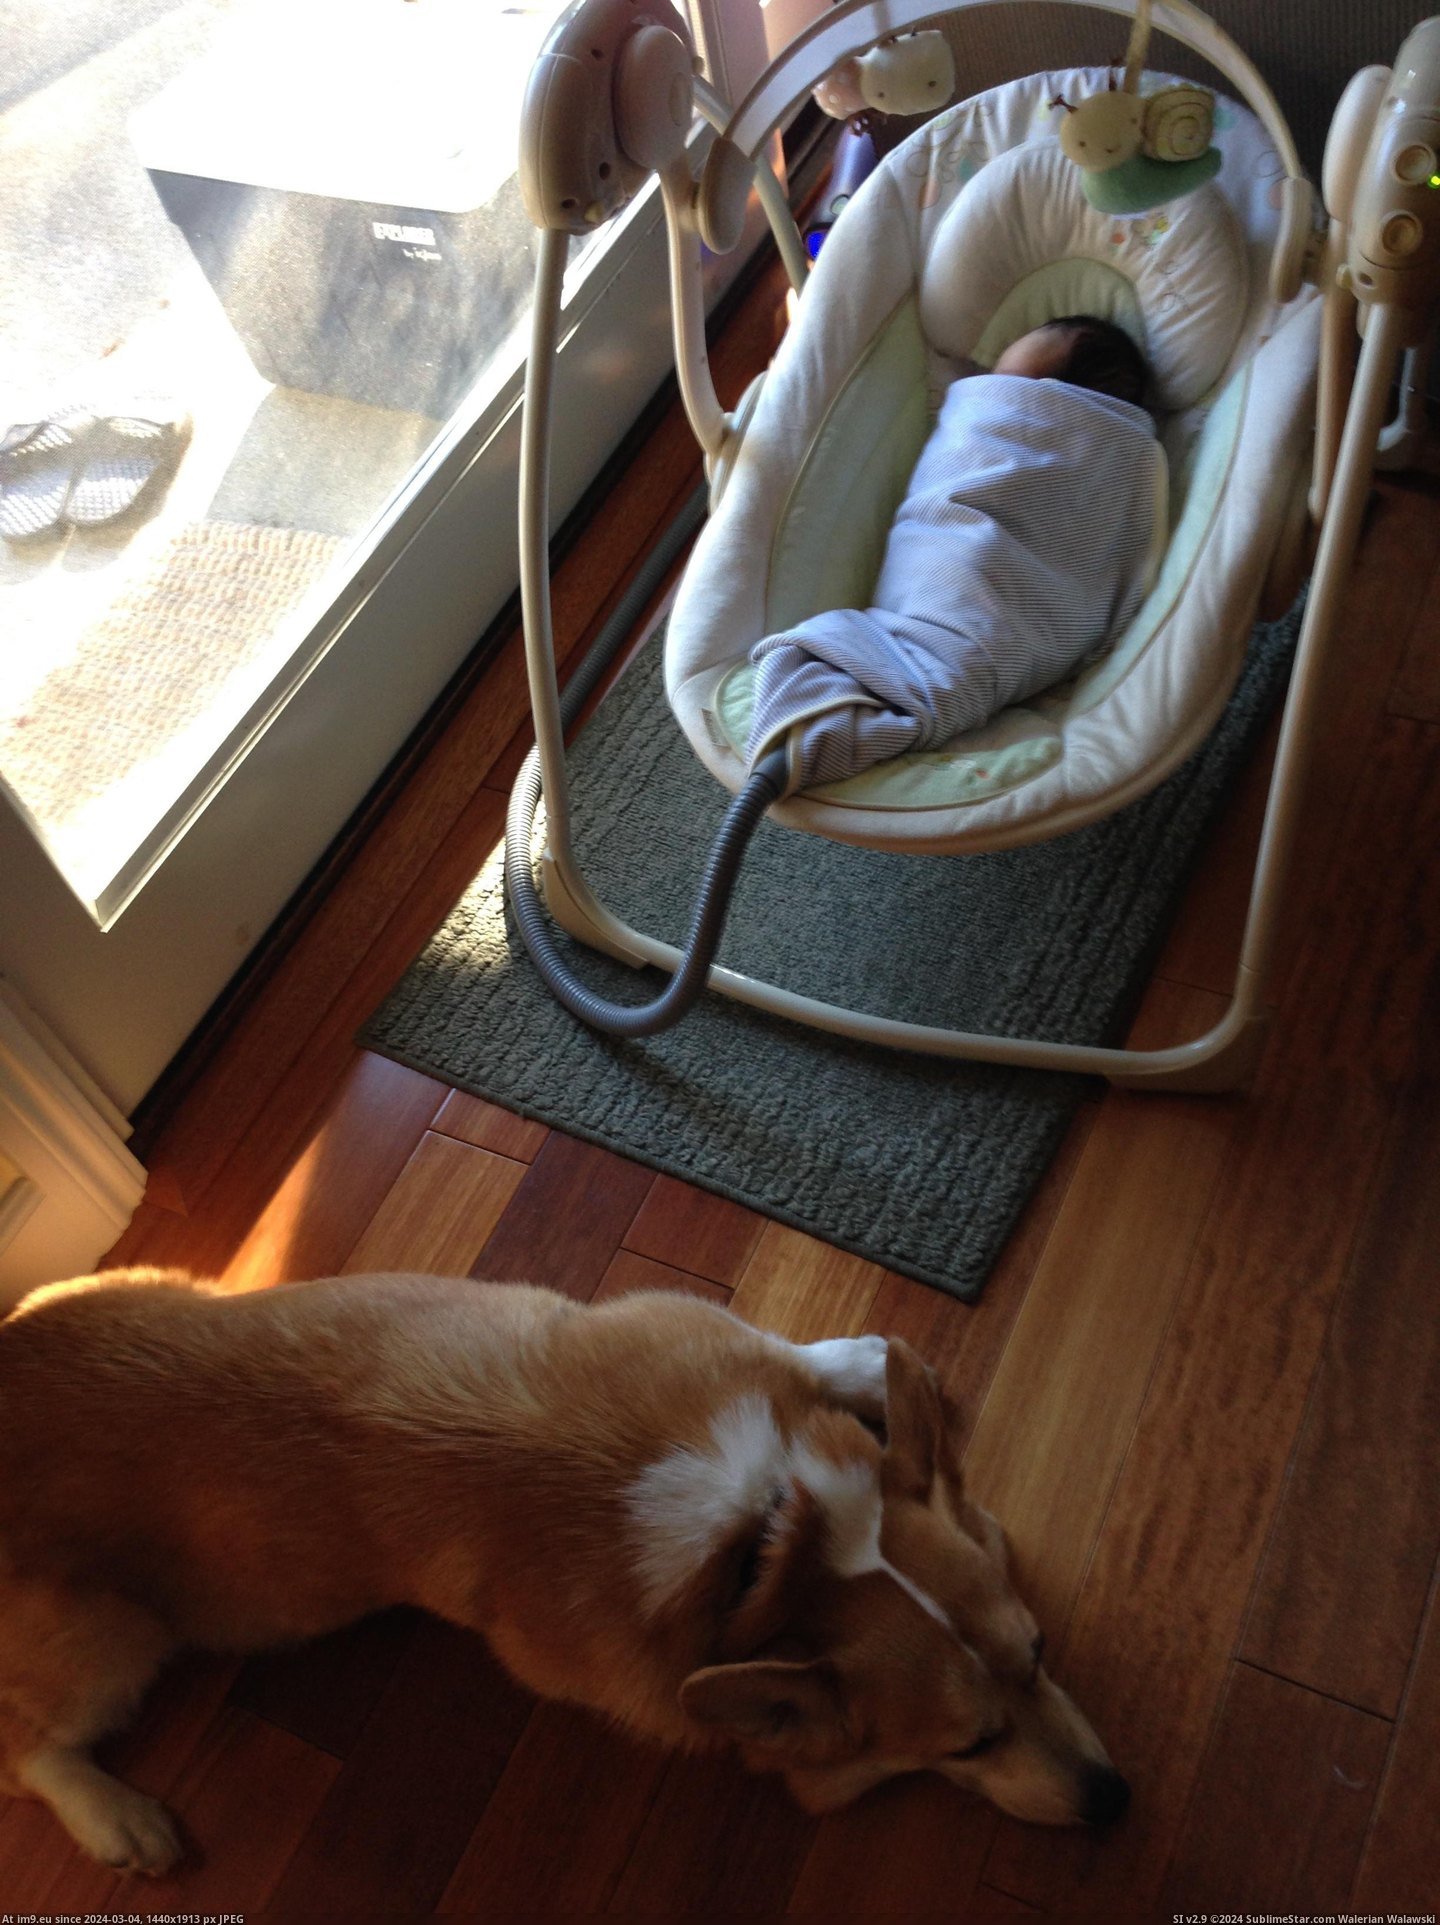 #Was #New #Ago #But #How #Daughter #Weeks #Born [Aww] My daughter was born three weeks ago. I worried about how my corgi would react but he's treating her like his new BFF... 4 Pic. (Obraz z album My r/AWW favs))